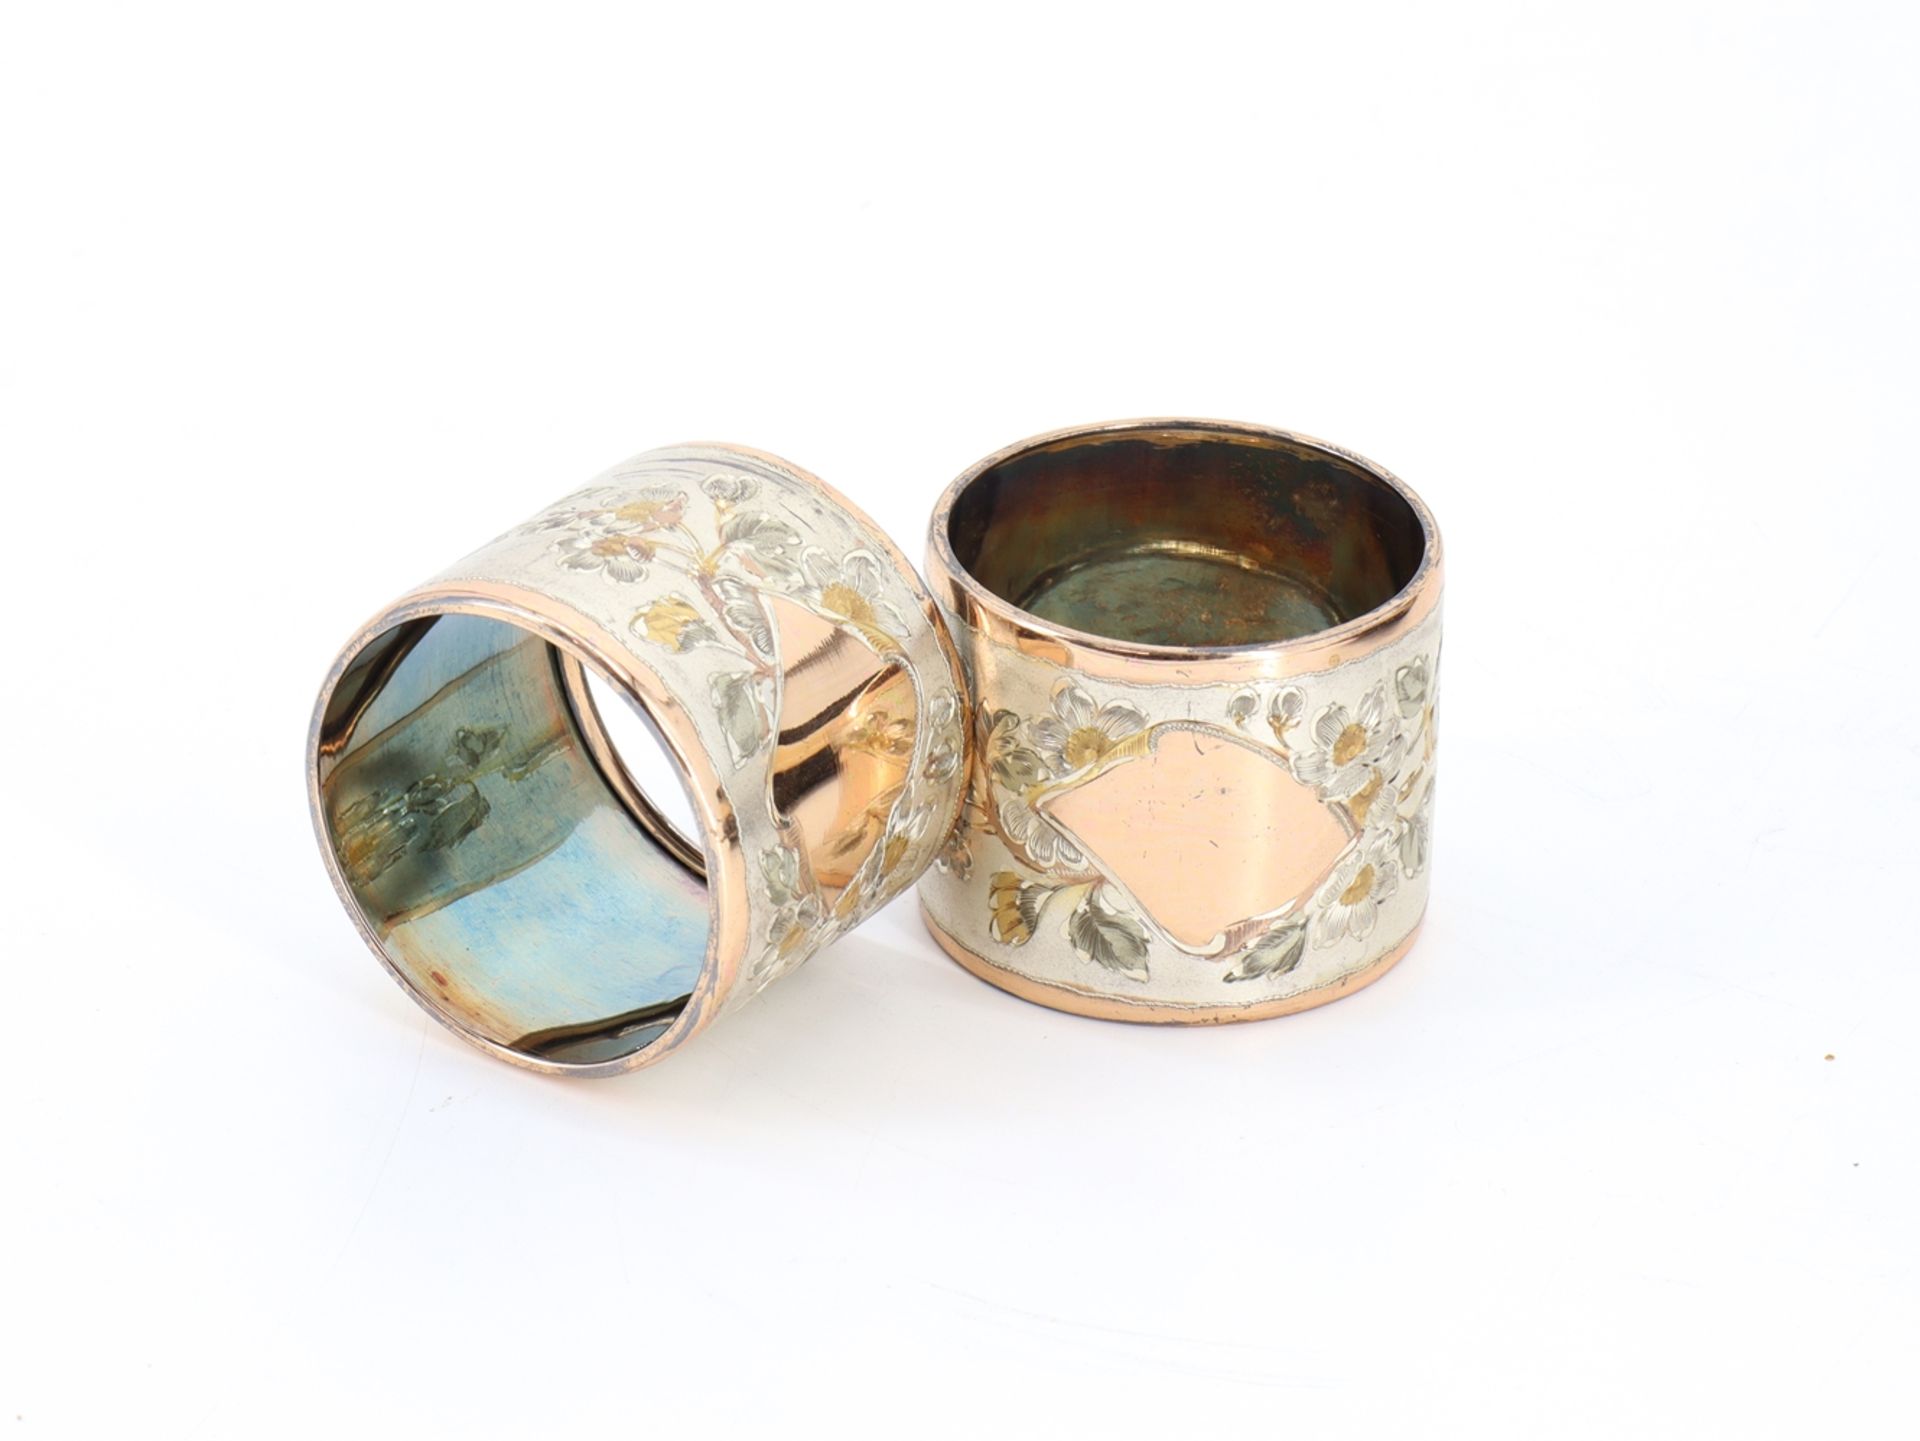 2 fine napkin rings, 800 silver, in case, around 1900 - Image 3 of 5